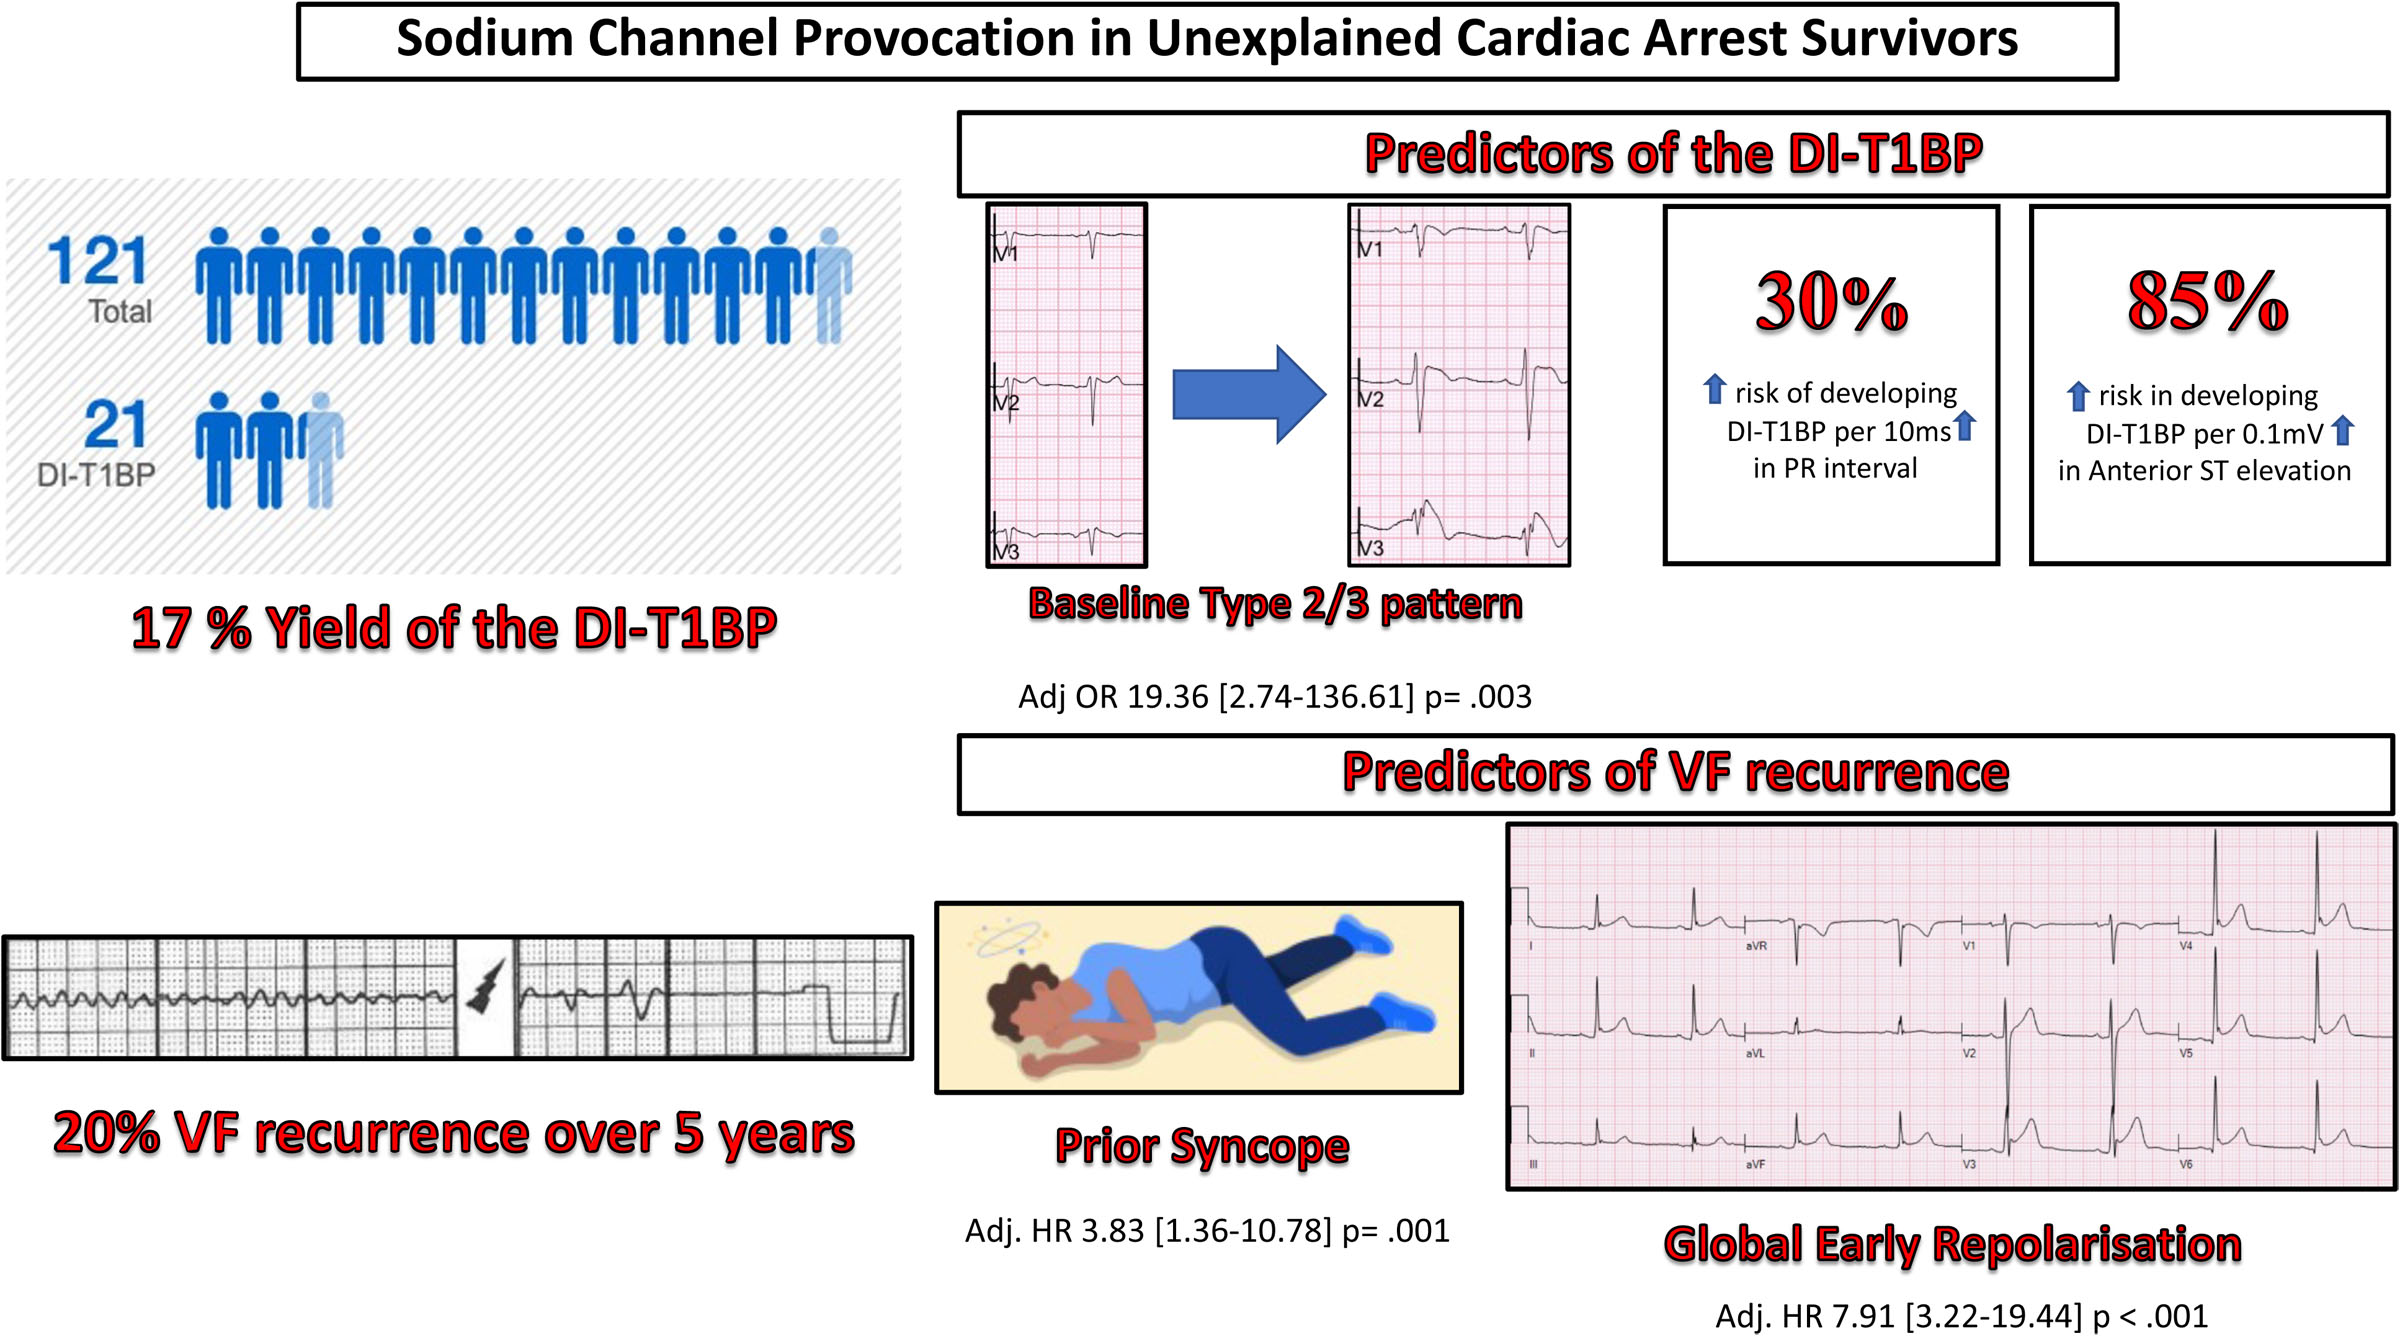 The Utility of Sodium Channel Provocation in Unexplained Cardiac Arrest Survivors and Electrocardiographic Predictors of Ventricular Fibrillation Recurrence